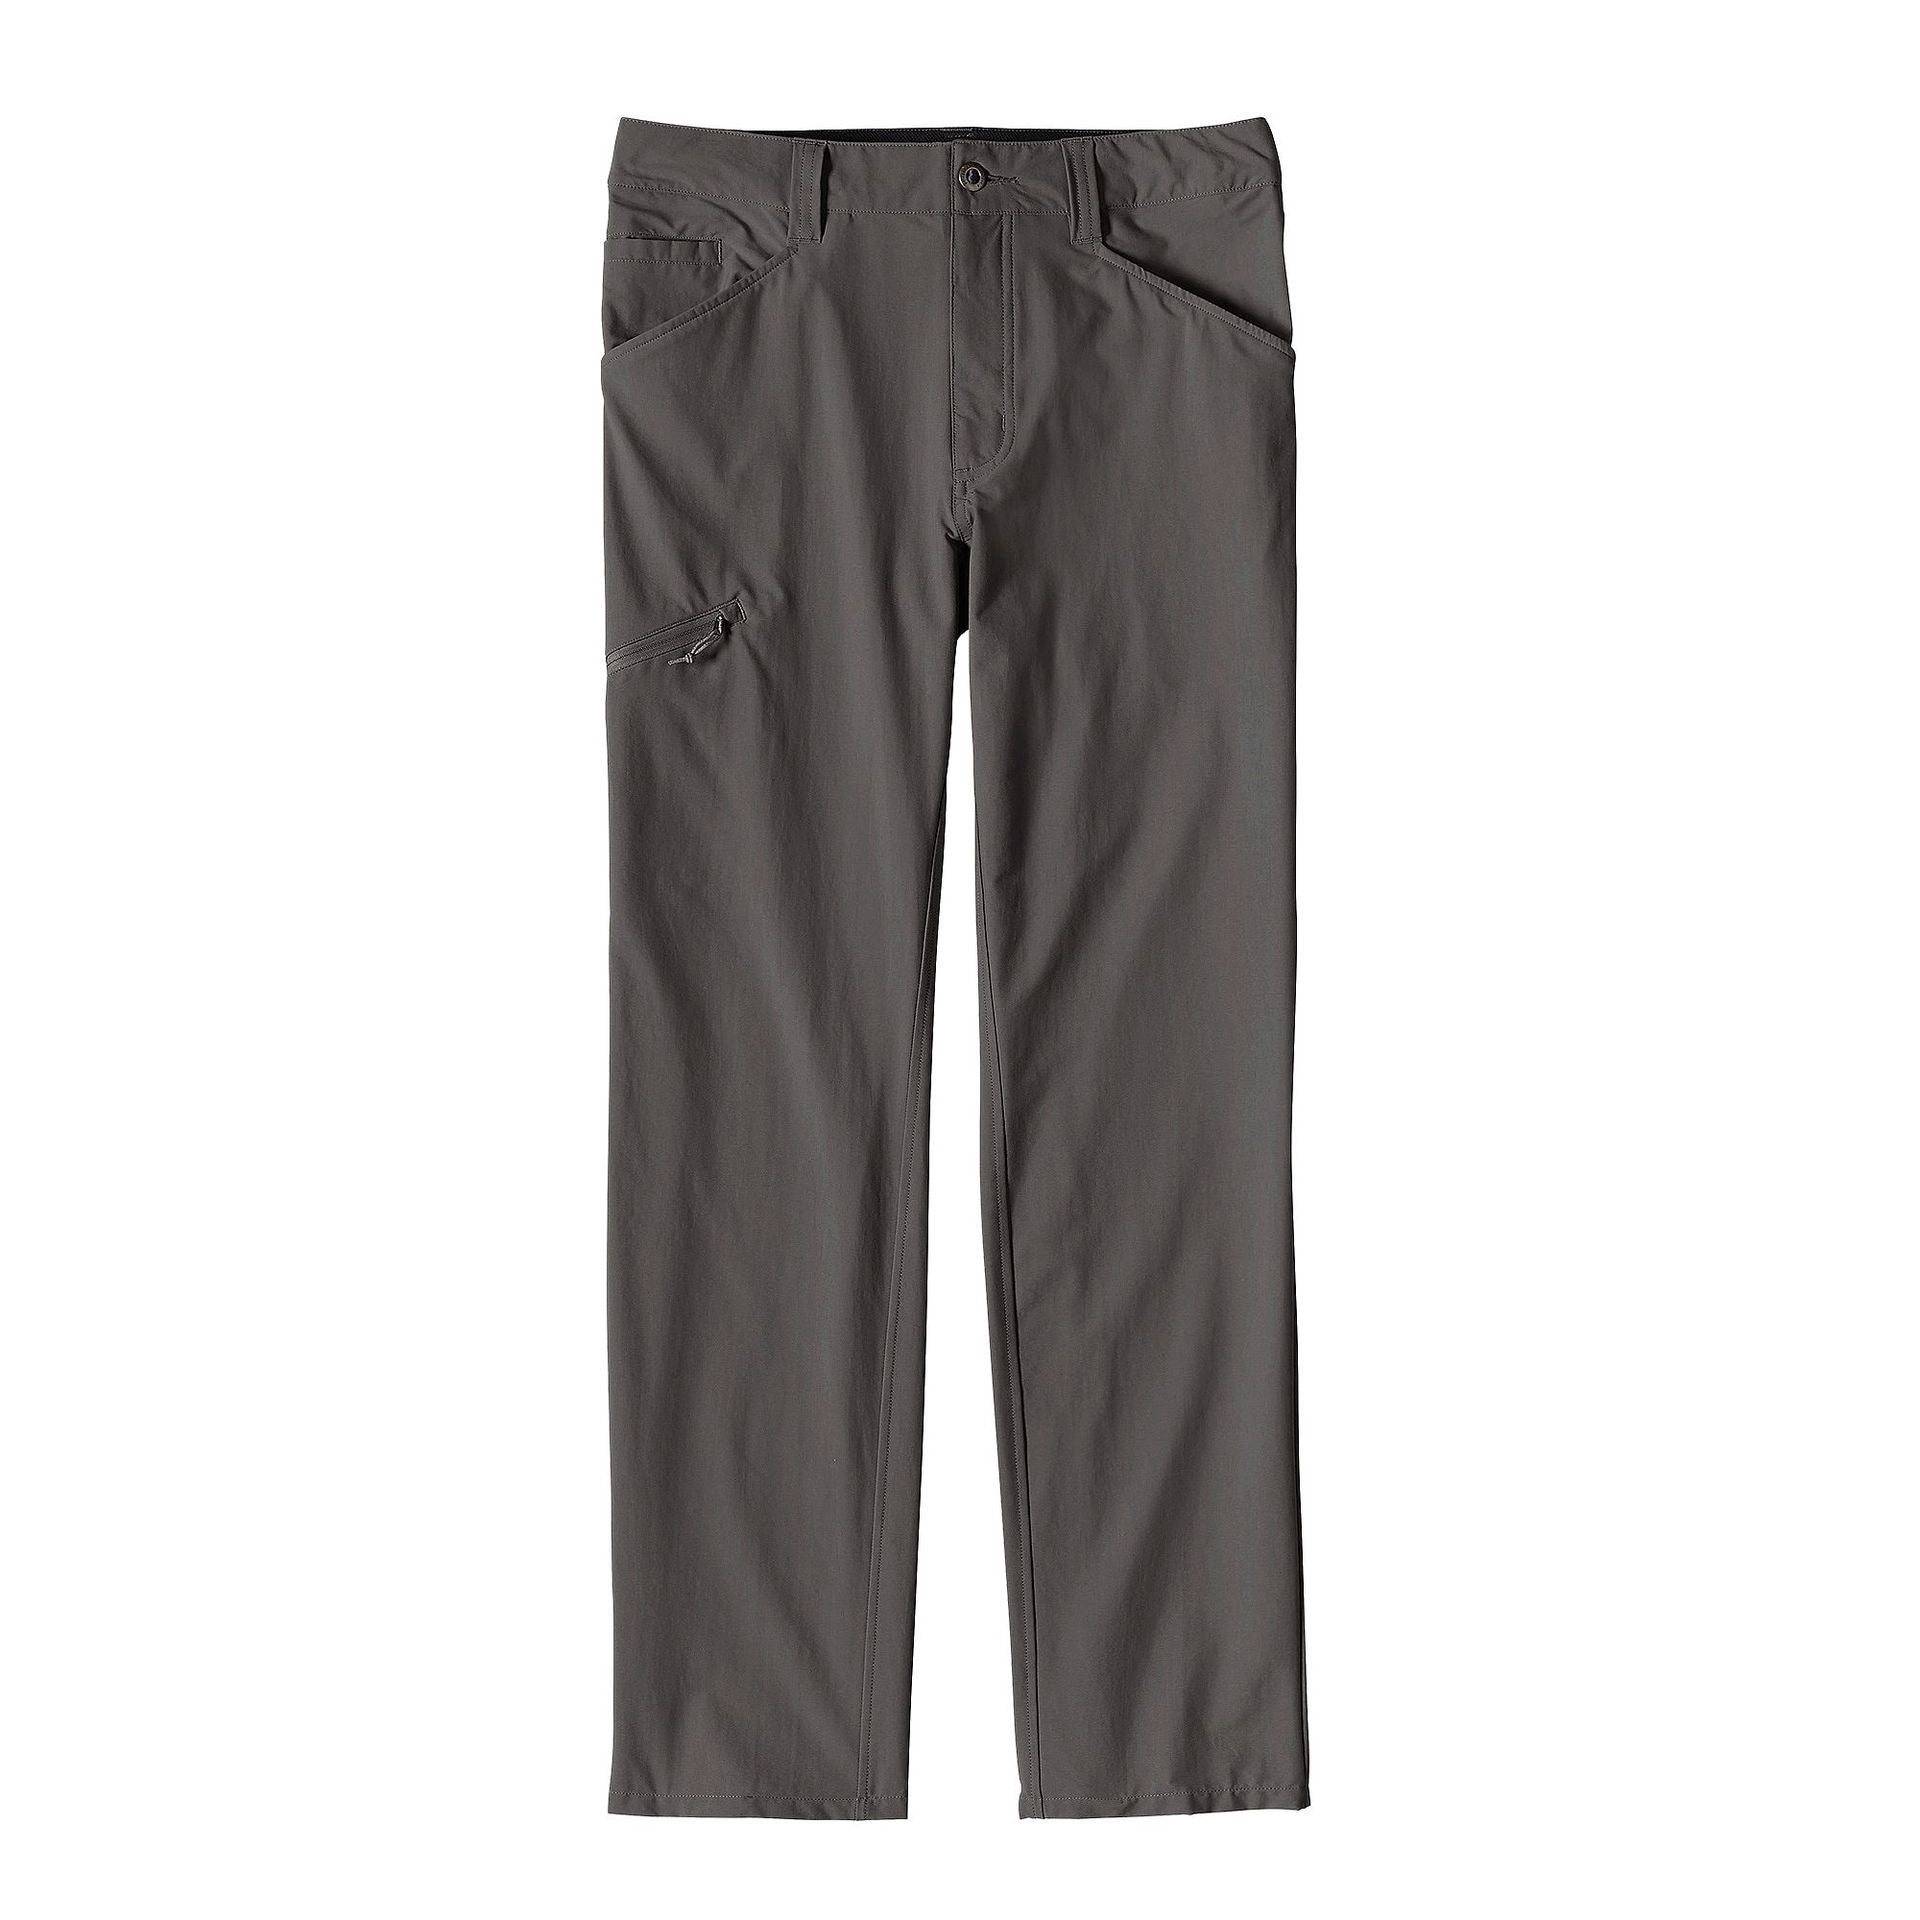 Patagonia Men's Quandary Pants/Forge Grey - Andy Thornal Company